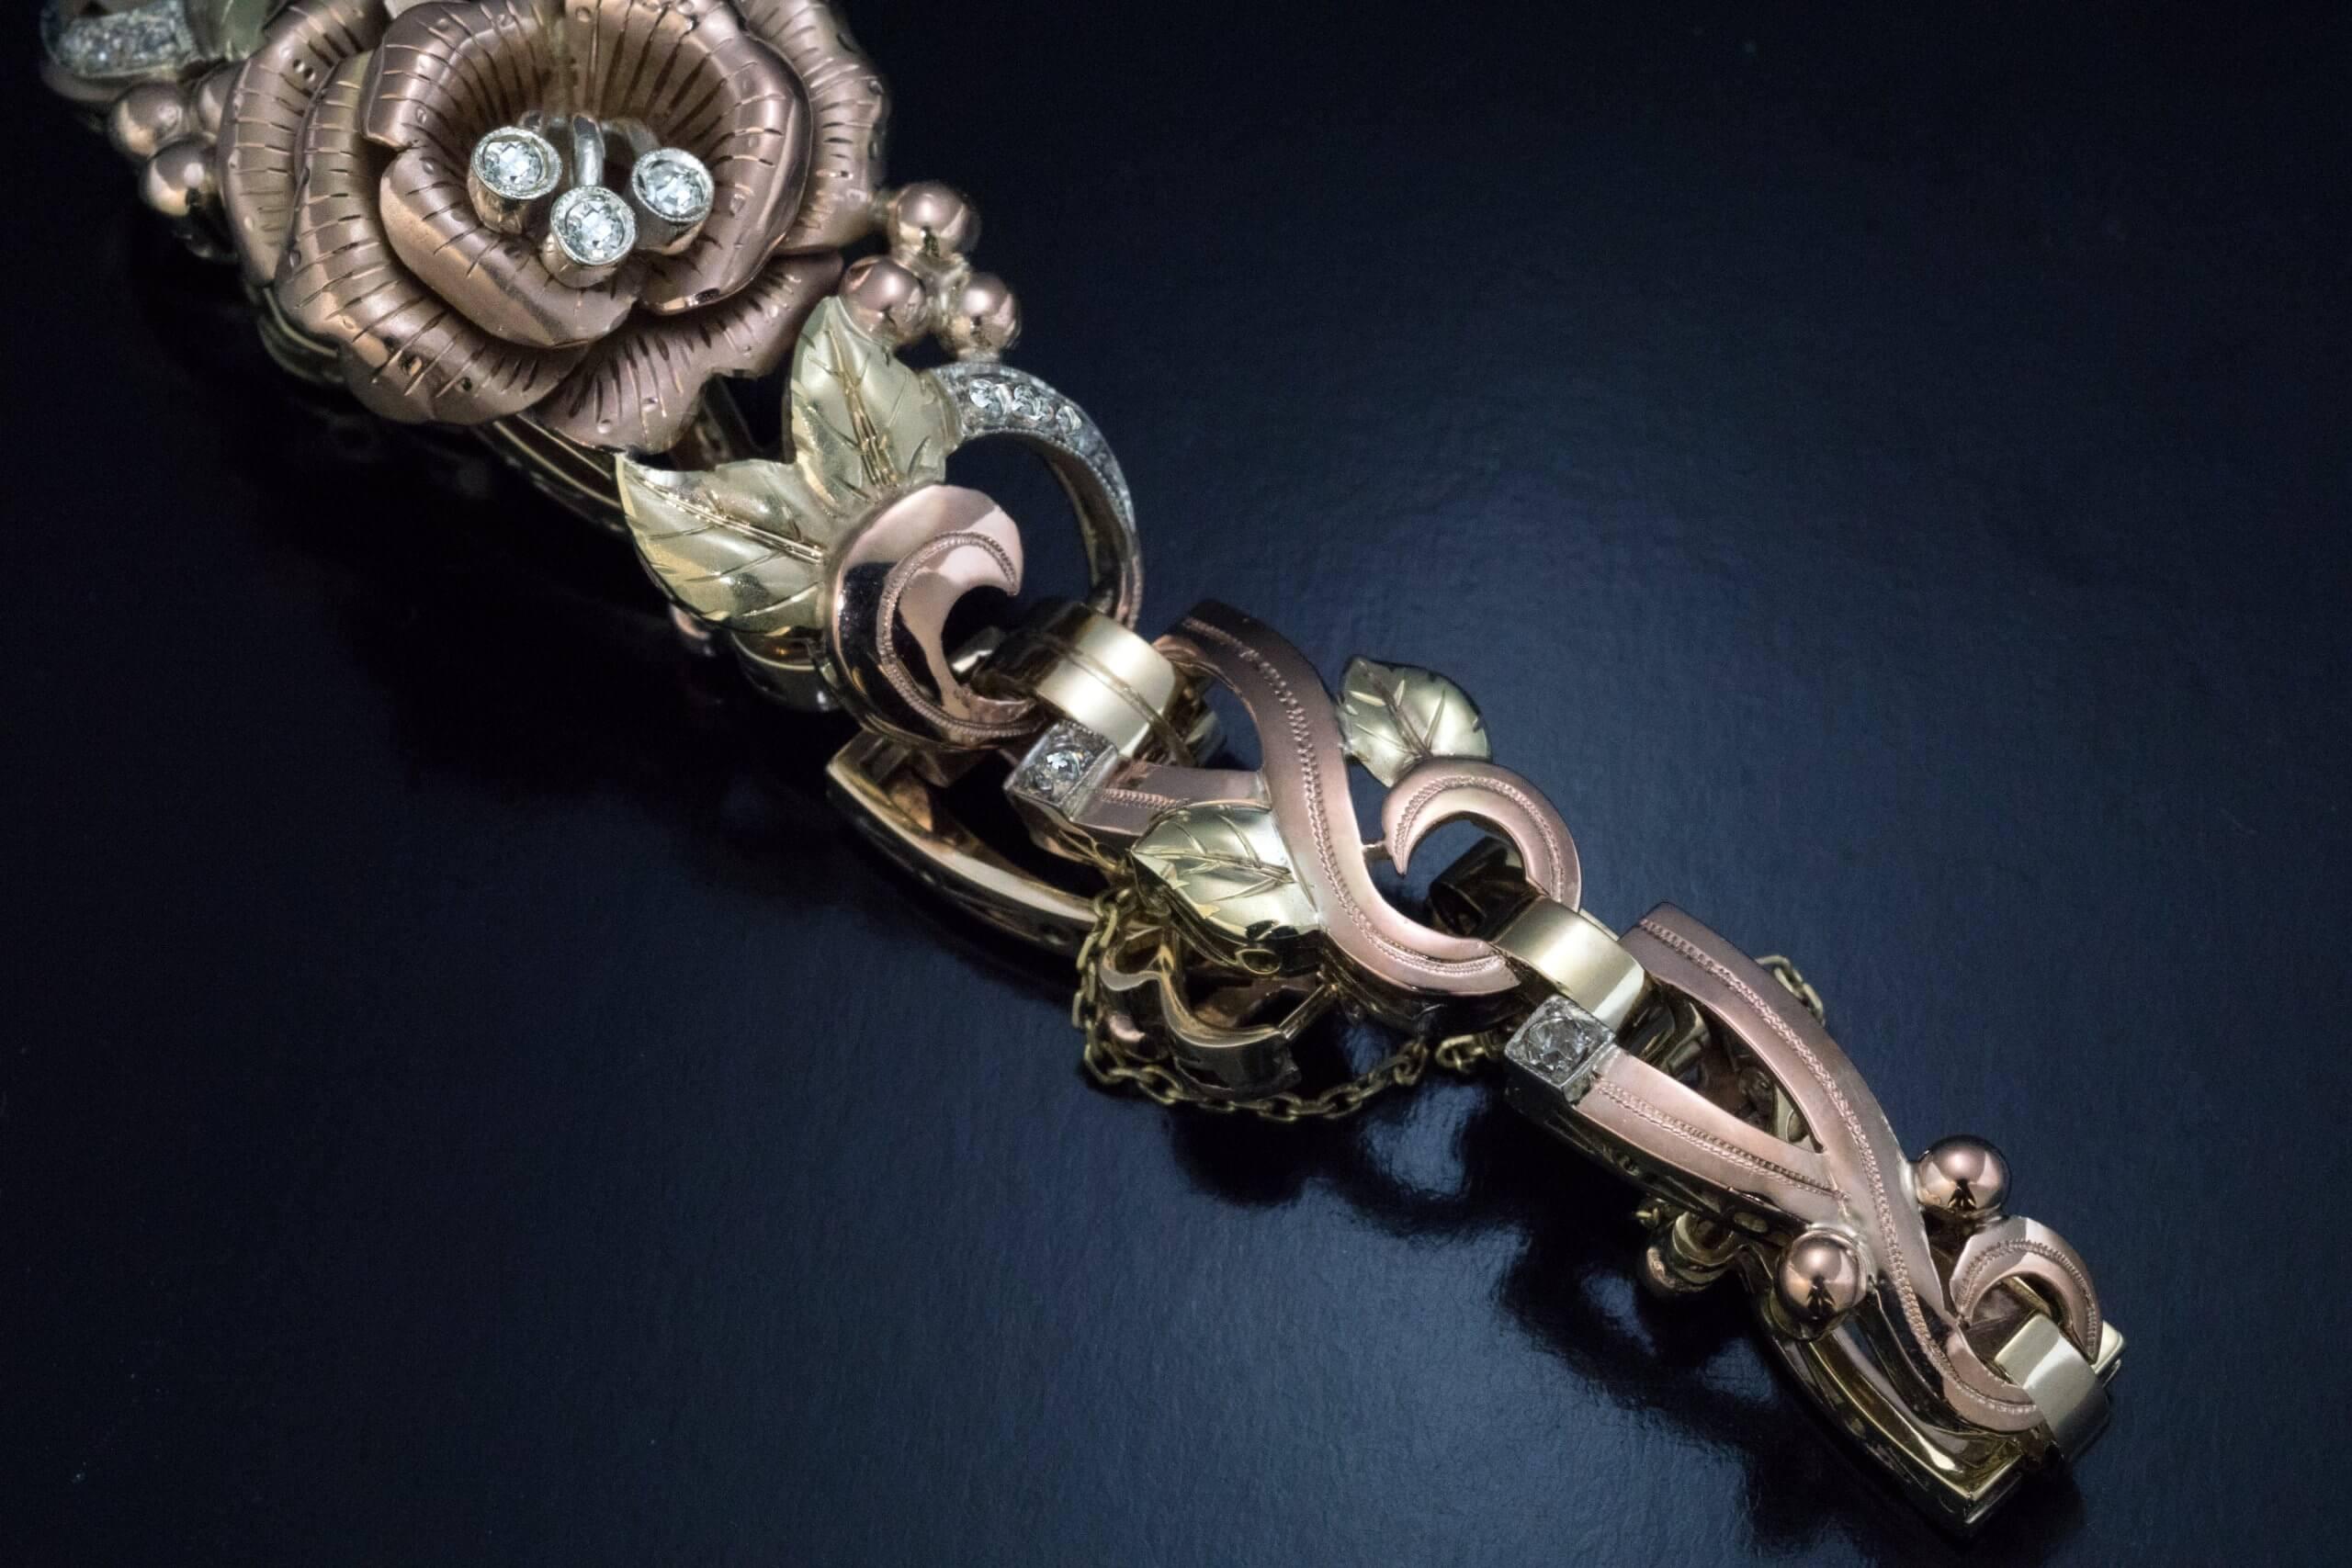 This ornate Art Deco era floral motif bracelet was made in Romania in the late 1920s – early 1930s.  The bracelet is finely crafted in rose, green, and white 14K gold and accented with small old cut diamonds.  Marked on clasp with wolf’s head